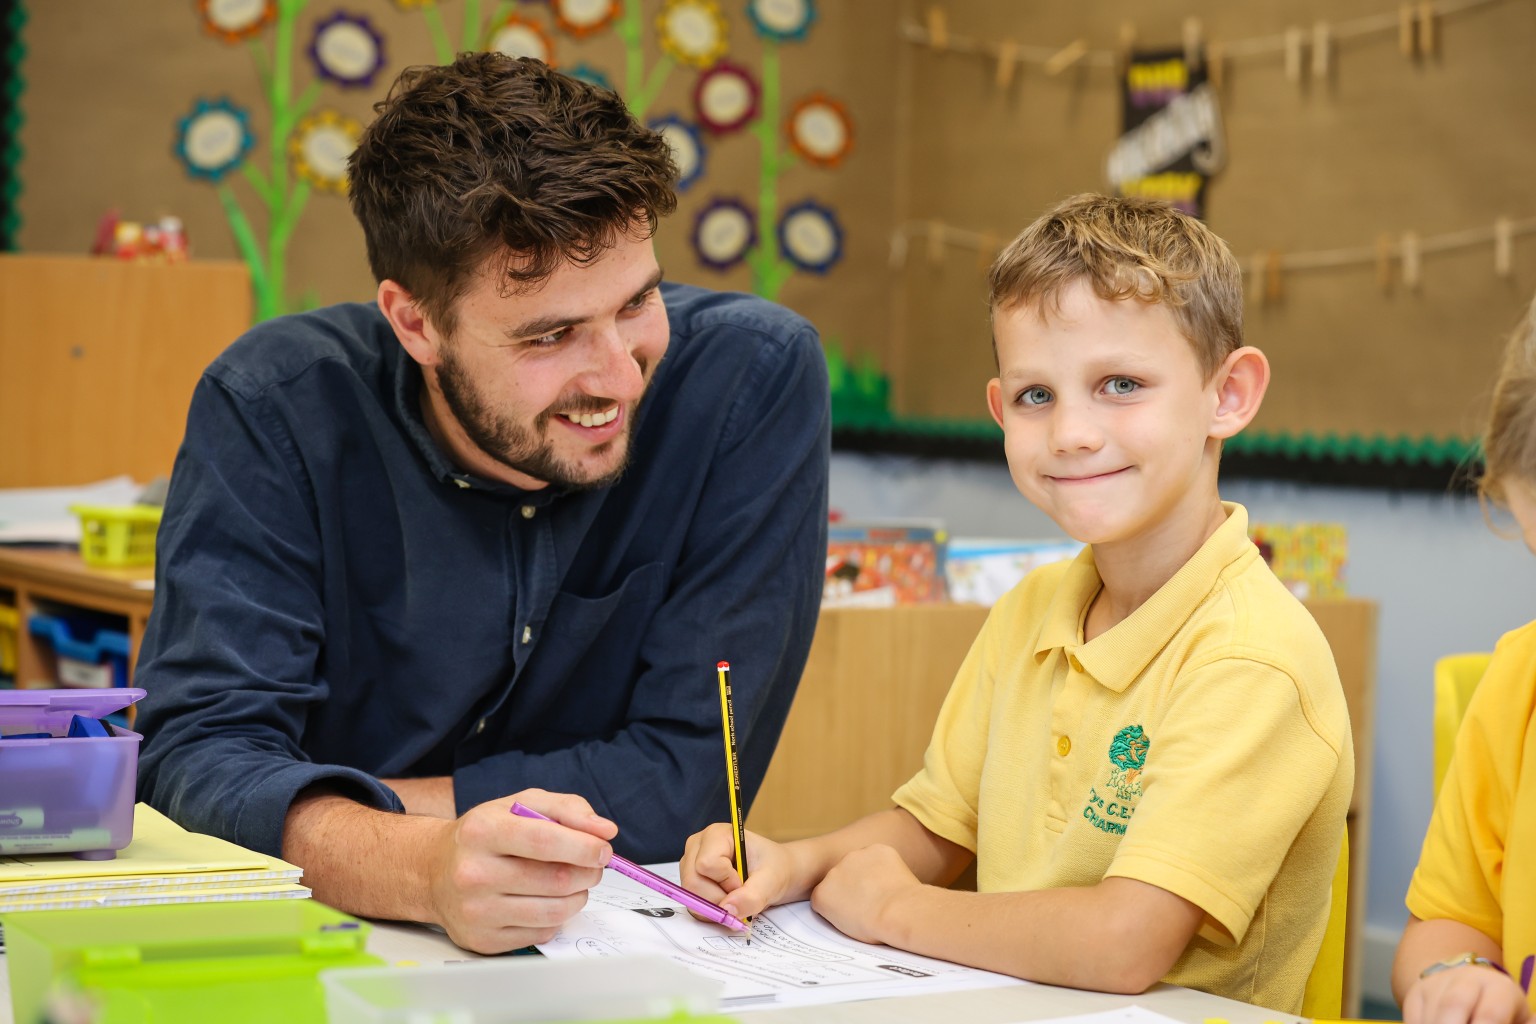 Teacher and pupil in the classroom